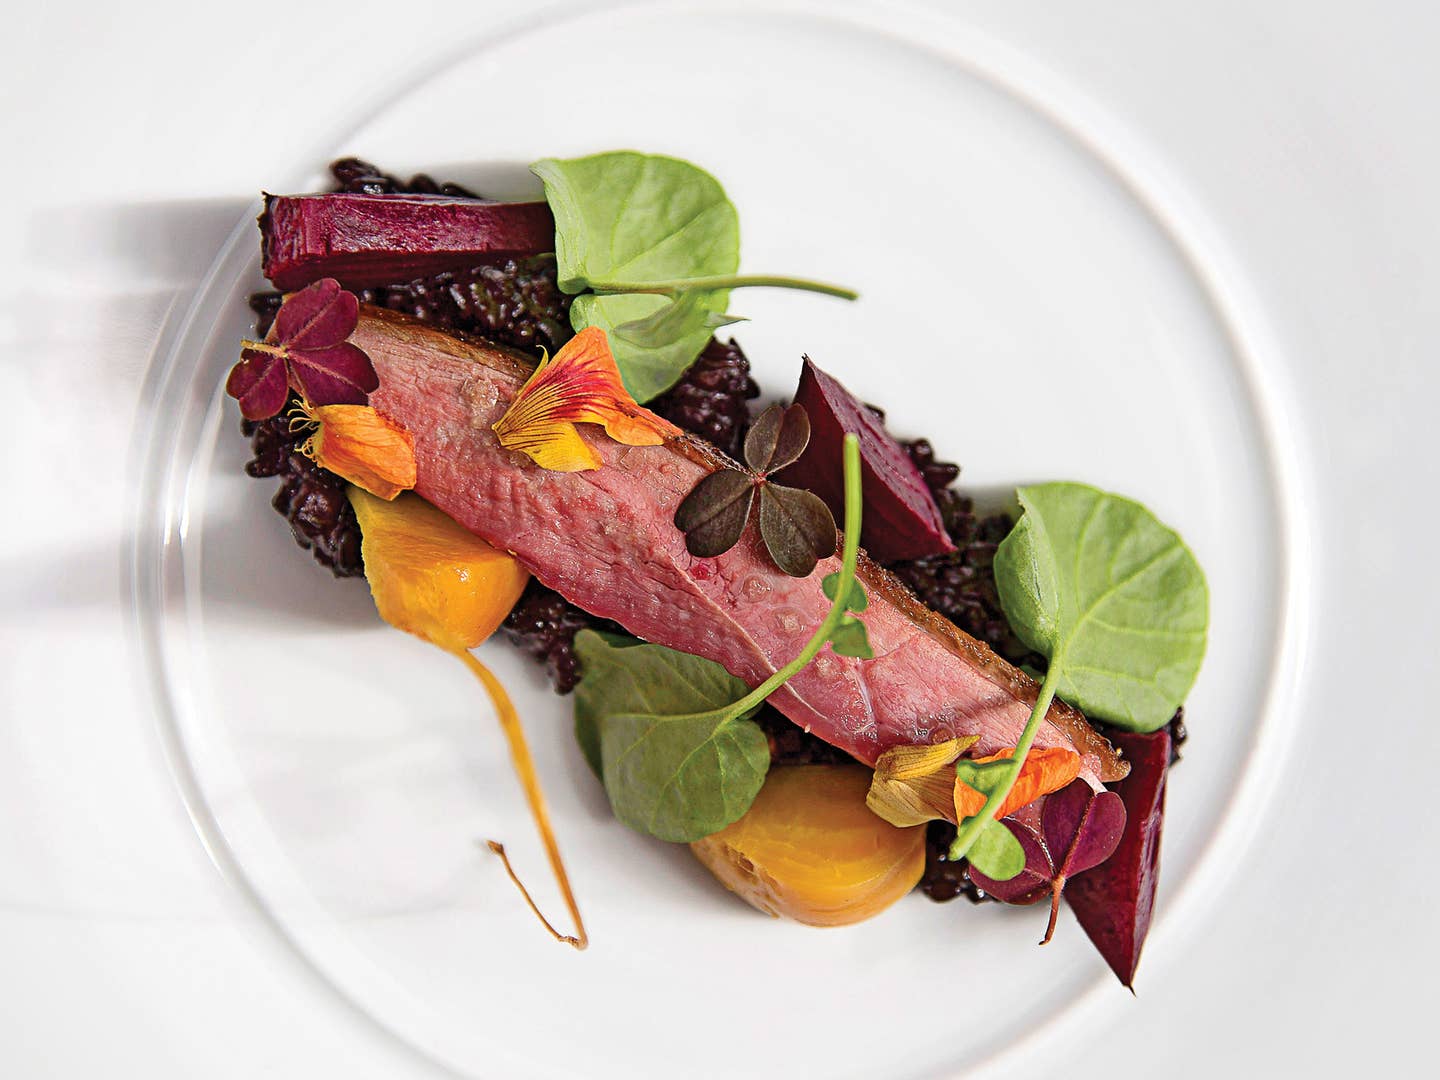 Skillet-Cooked Duck Breast with Beets and Watercress